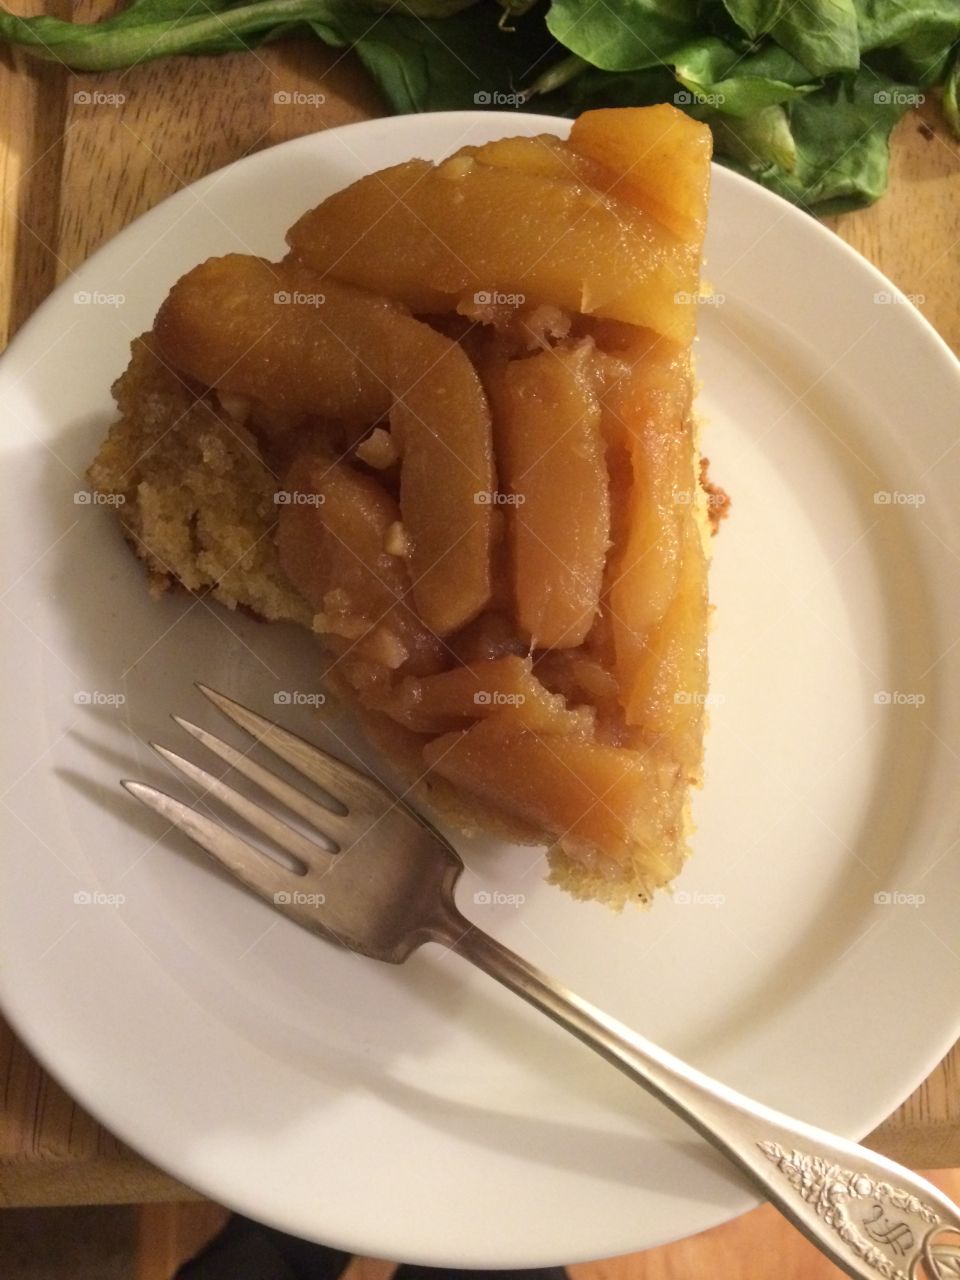 Pear Upside-Down Cake. I wanted something cheery for the start of autumn. This tastes every bit like cold nights and blustery trees